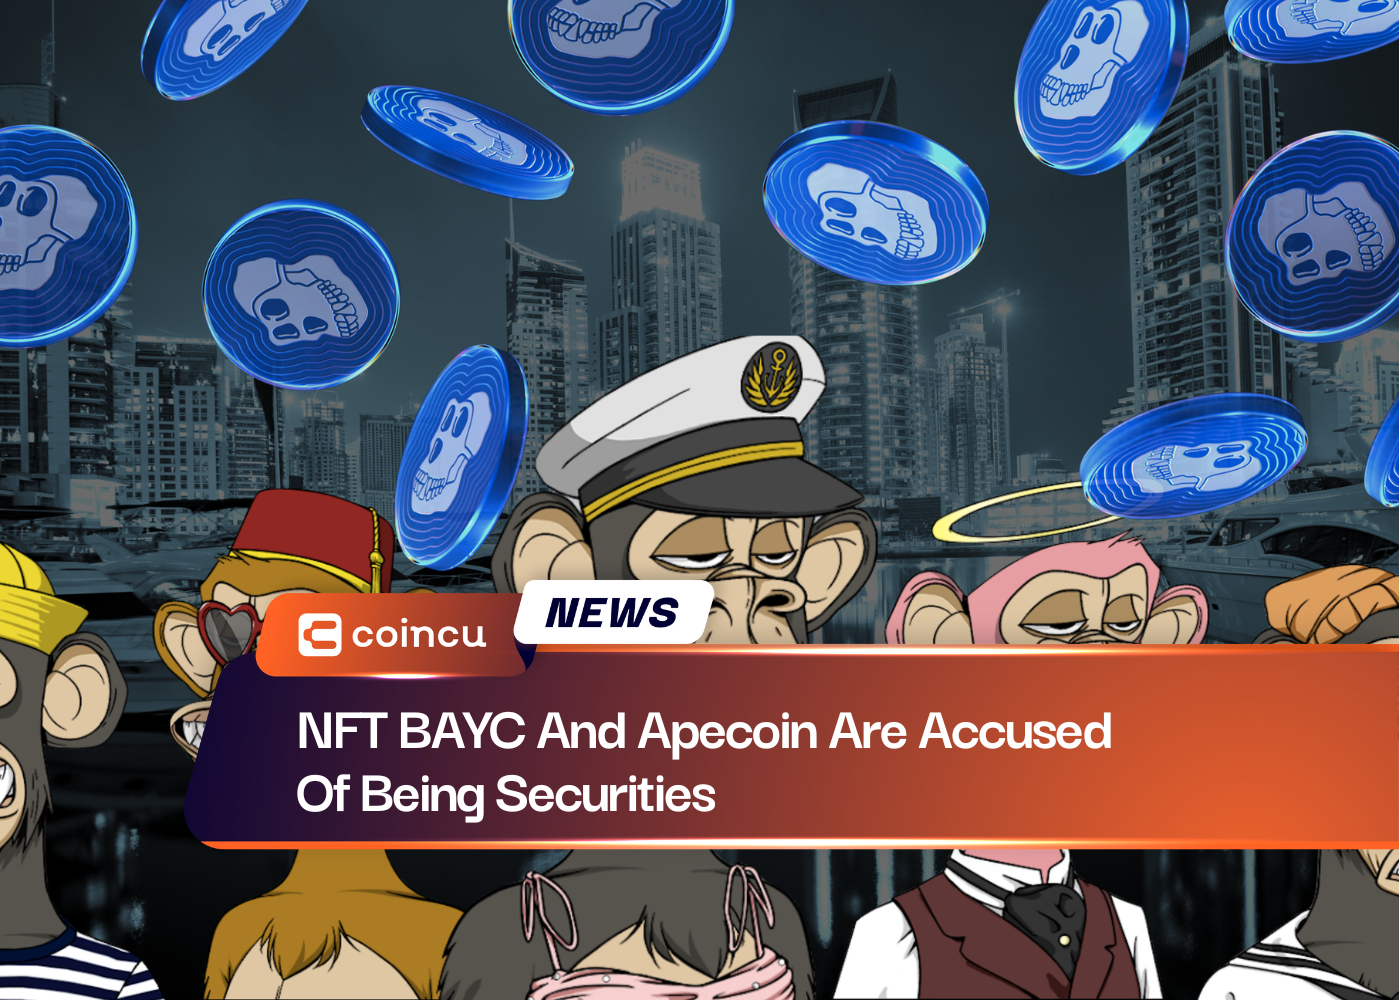 NFT BAYC And Apecoin Are Accused Of Being Securities